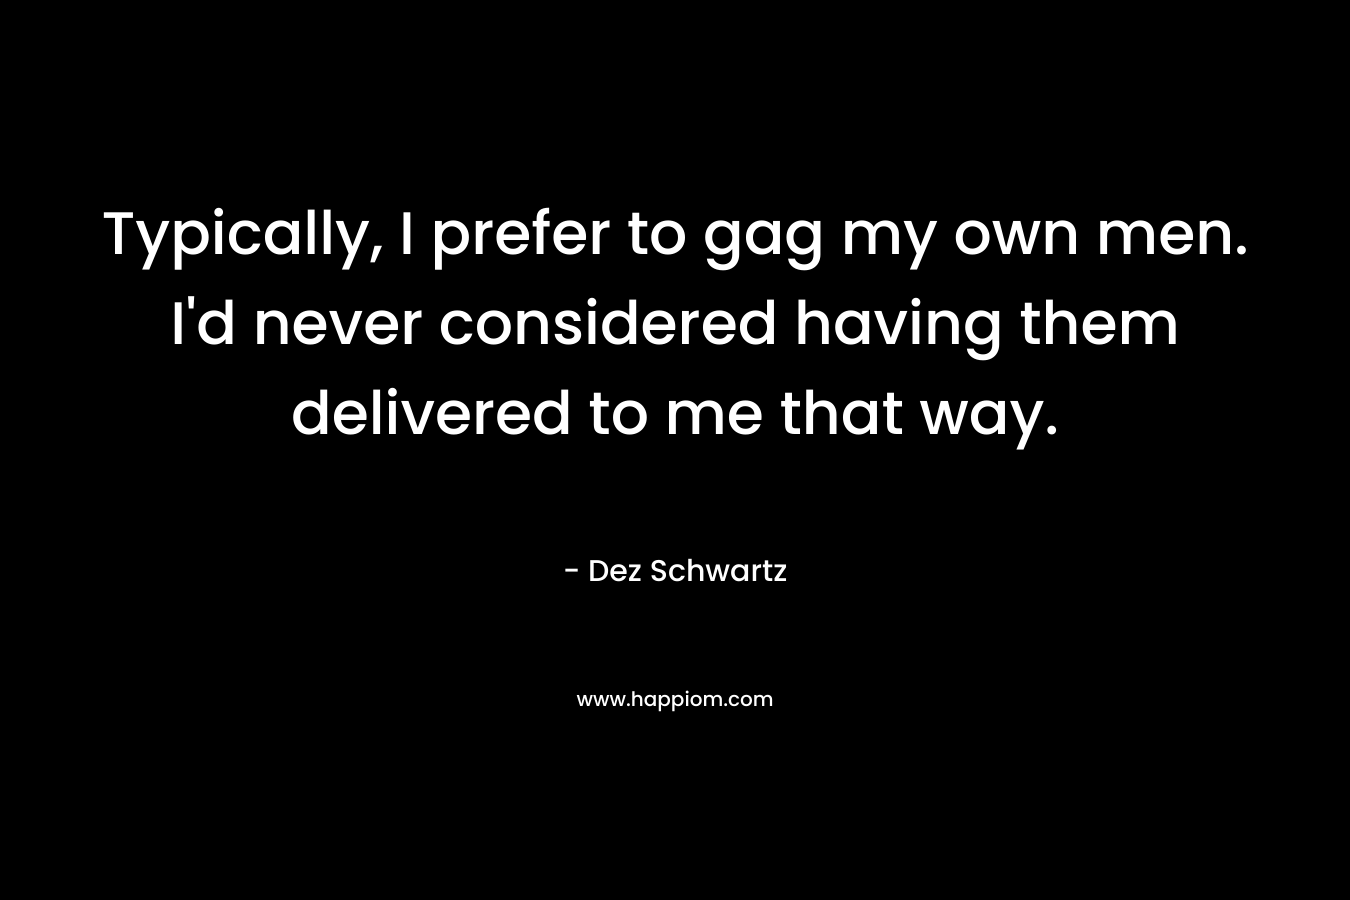 Typically, I prefer to gag my own men. I’d never considered having them delivered to me that way. – Dez Schwartz